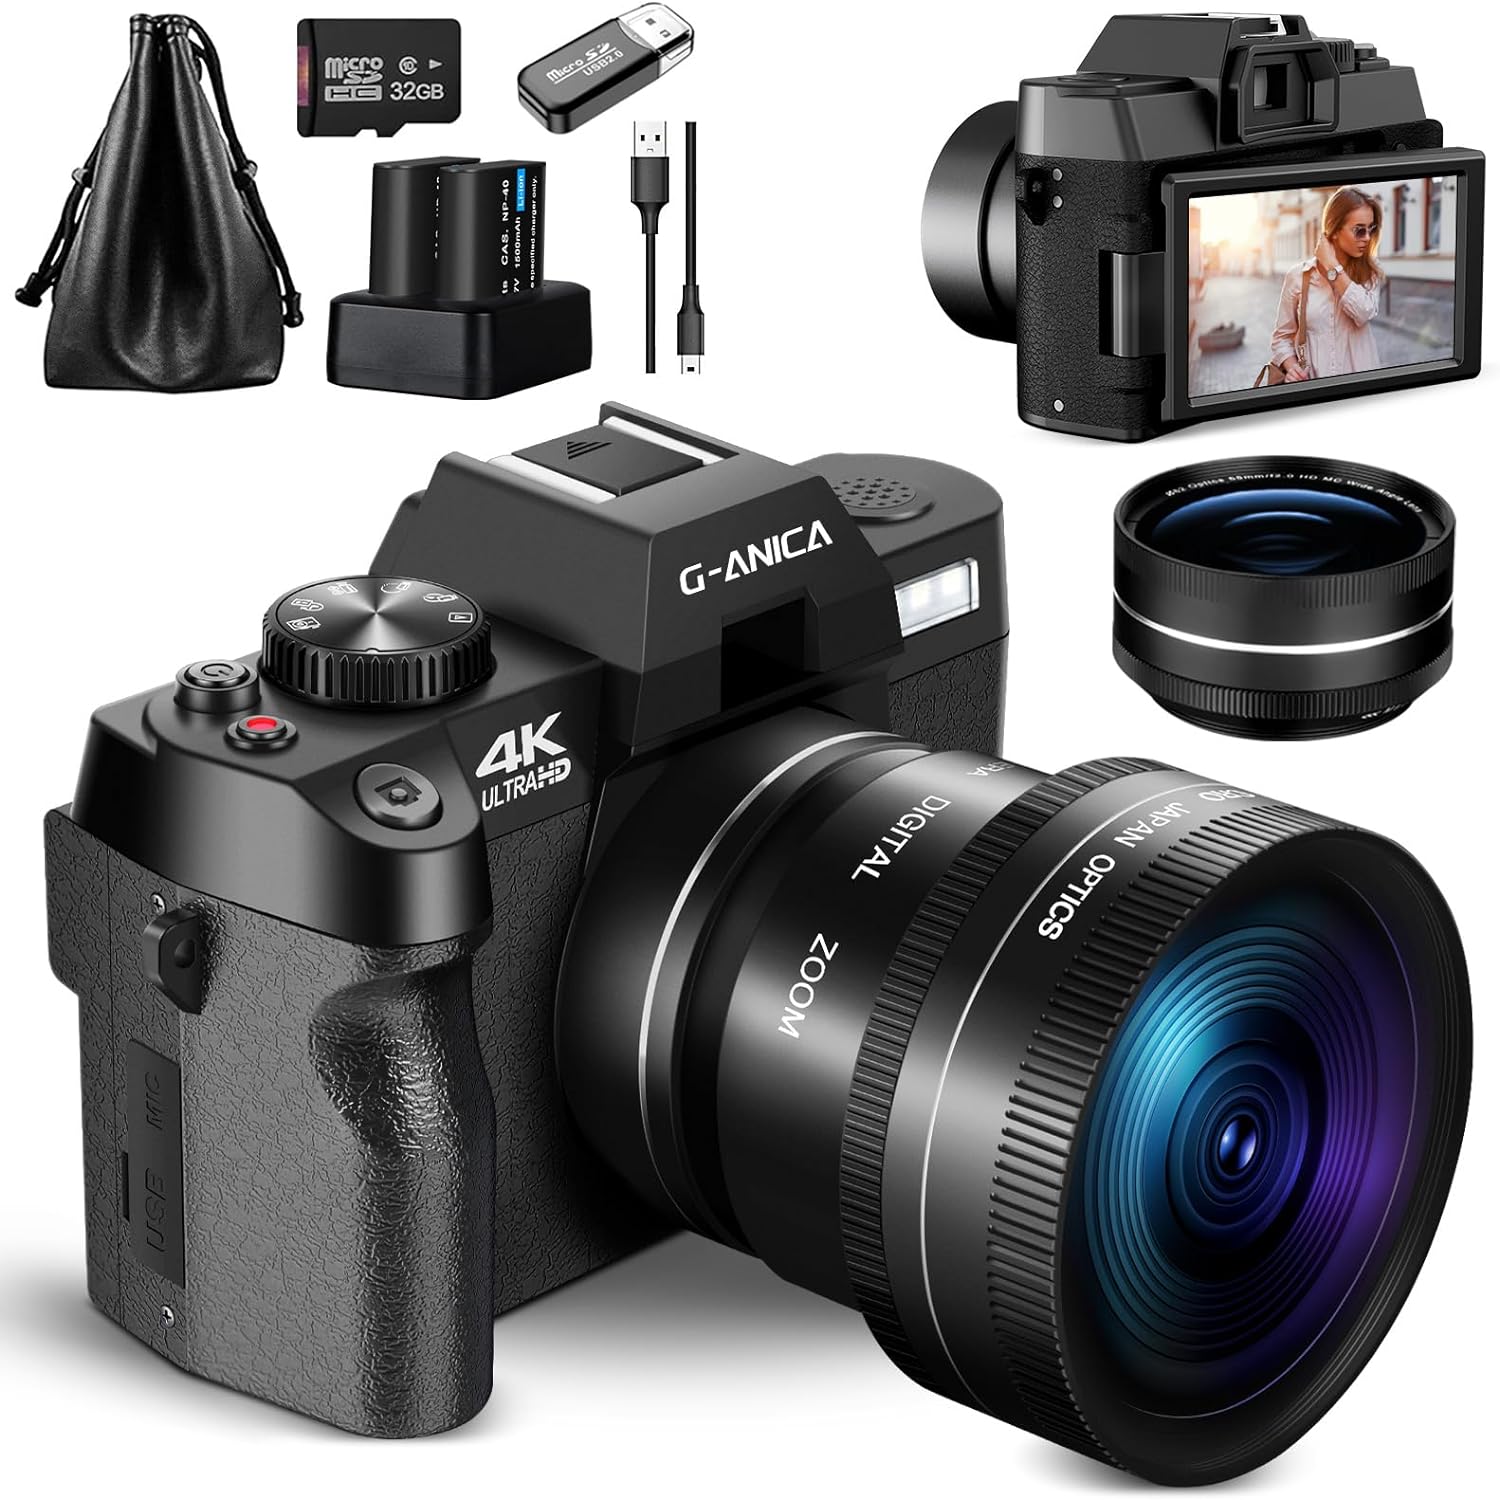 G-Anica 4K Digital Camera Review: Capture Stunning Moments